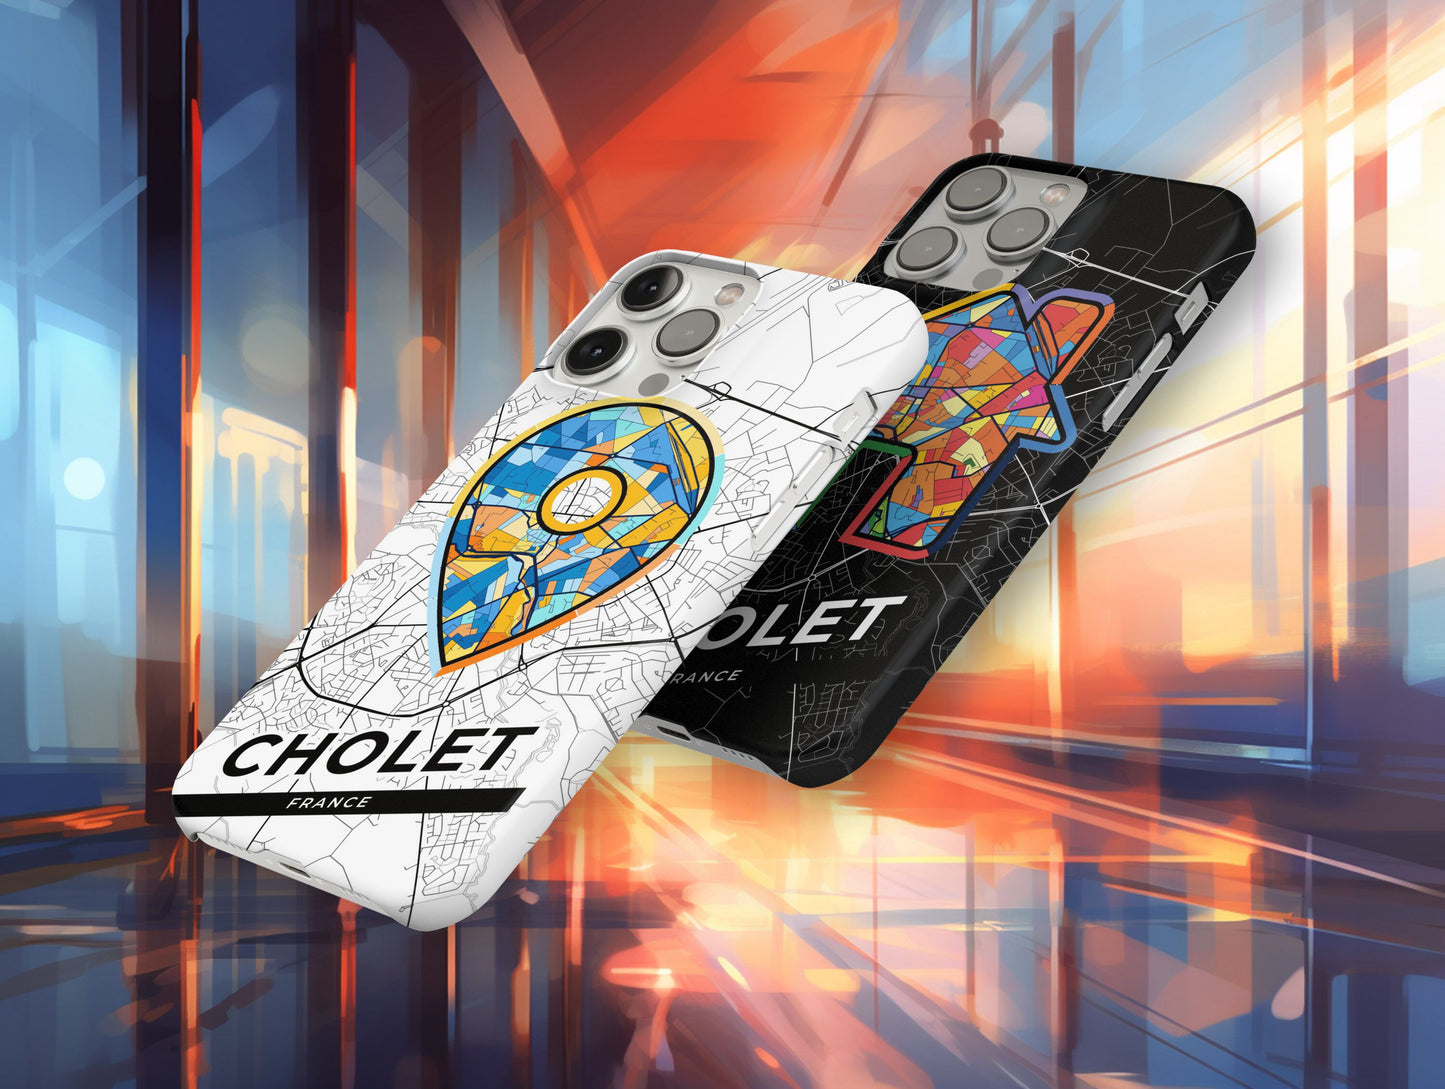 Cholet France slim phone case with colorful icon. Birthday, wedding or housewarming gift. Couple match cases.